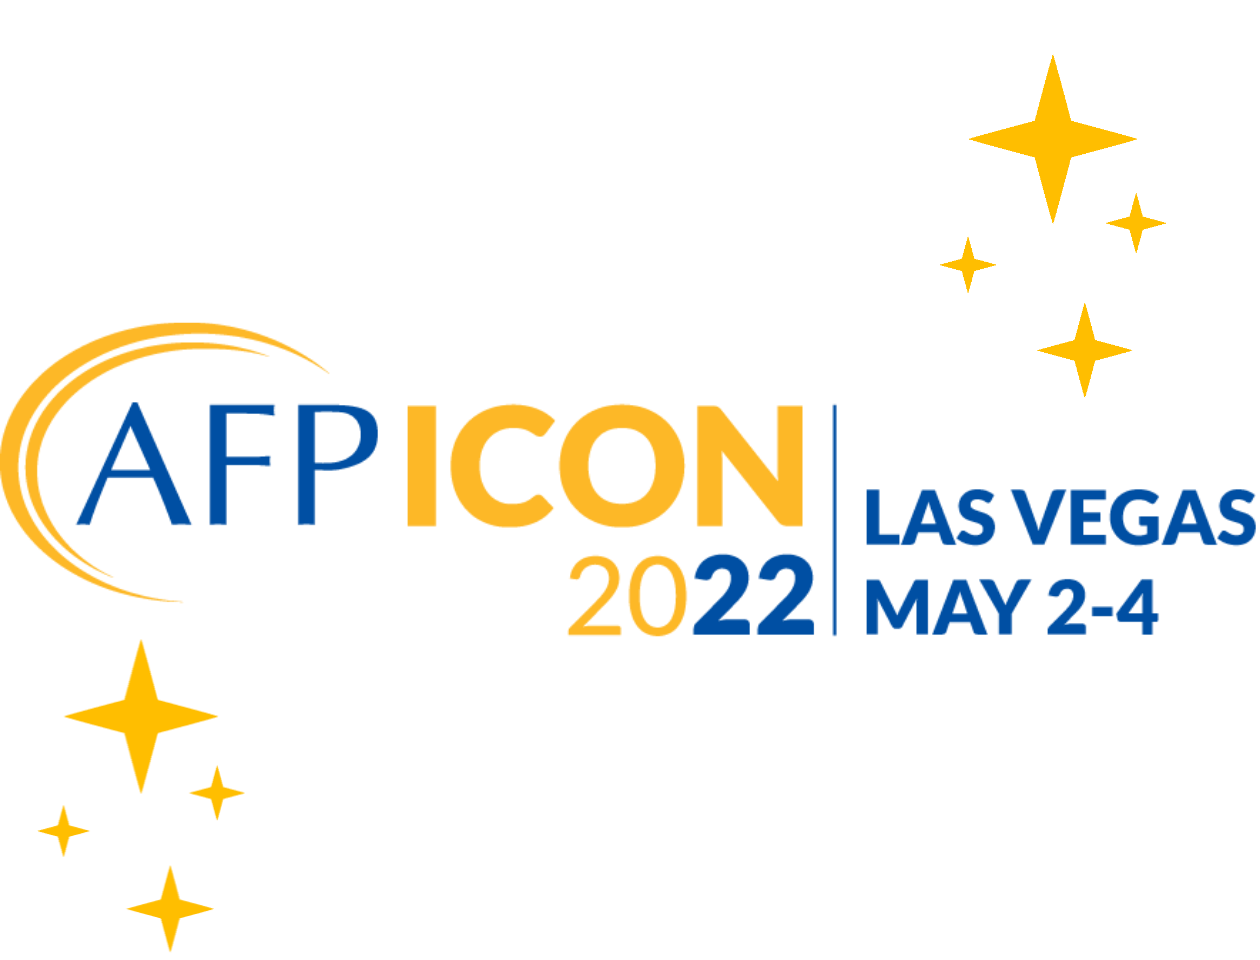 AFP Icon 2022 was ICONic! iWave